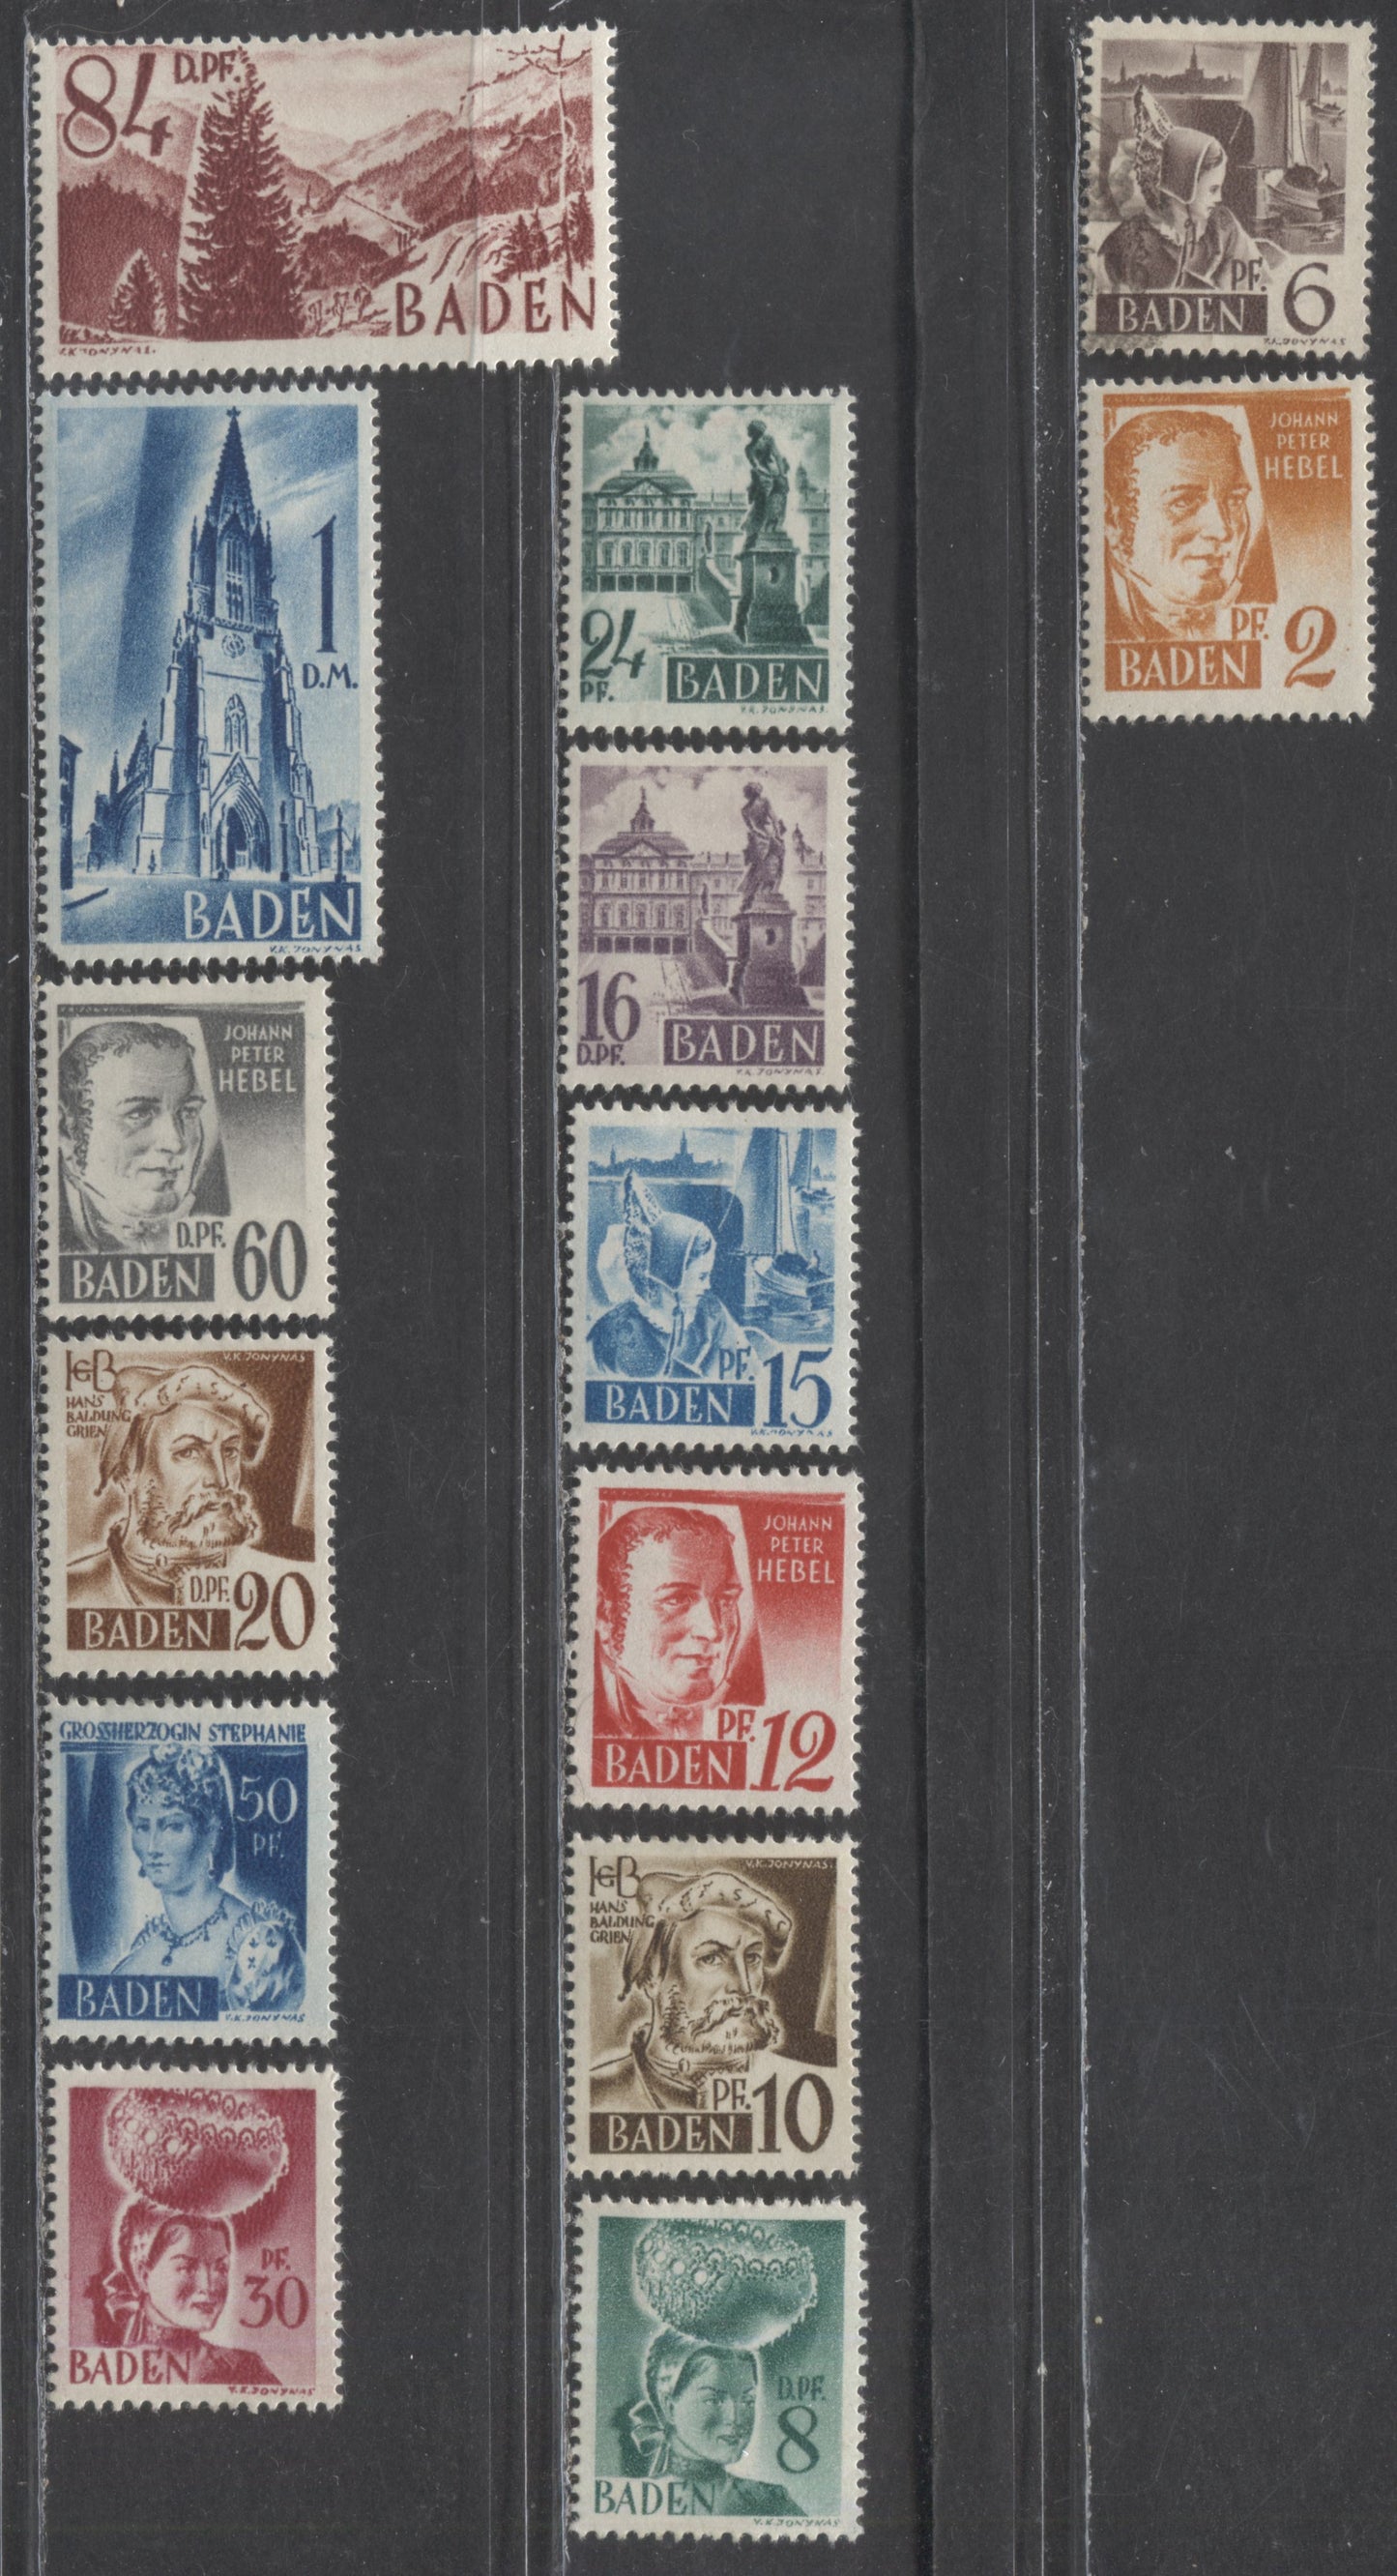 Lot 131 Germany - Occupation Of Baden SC#SN14-SN27 1948 Definitives, 14 F/VFOG Singles, Click on Listing to See ALL Pictures, 2017 Scott Cat. $9.35 USD